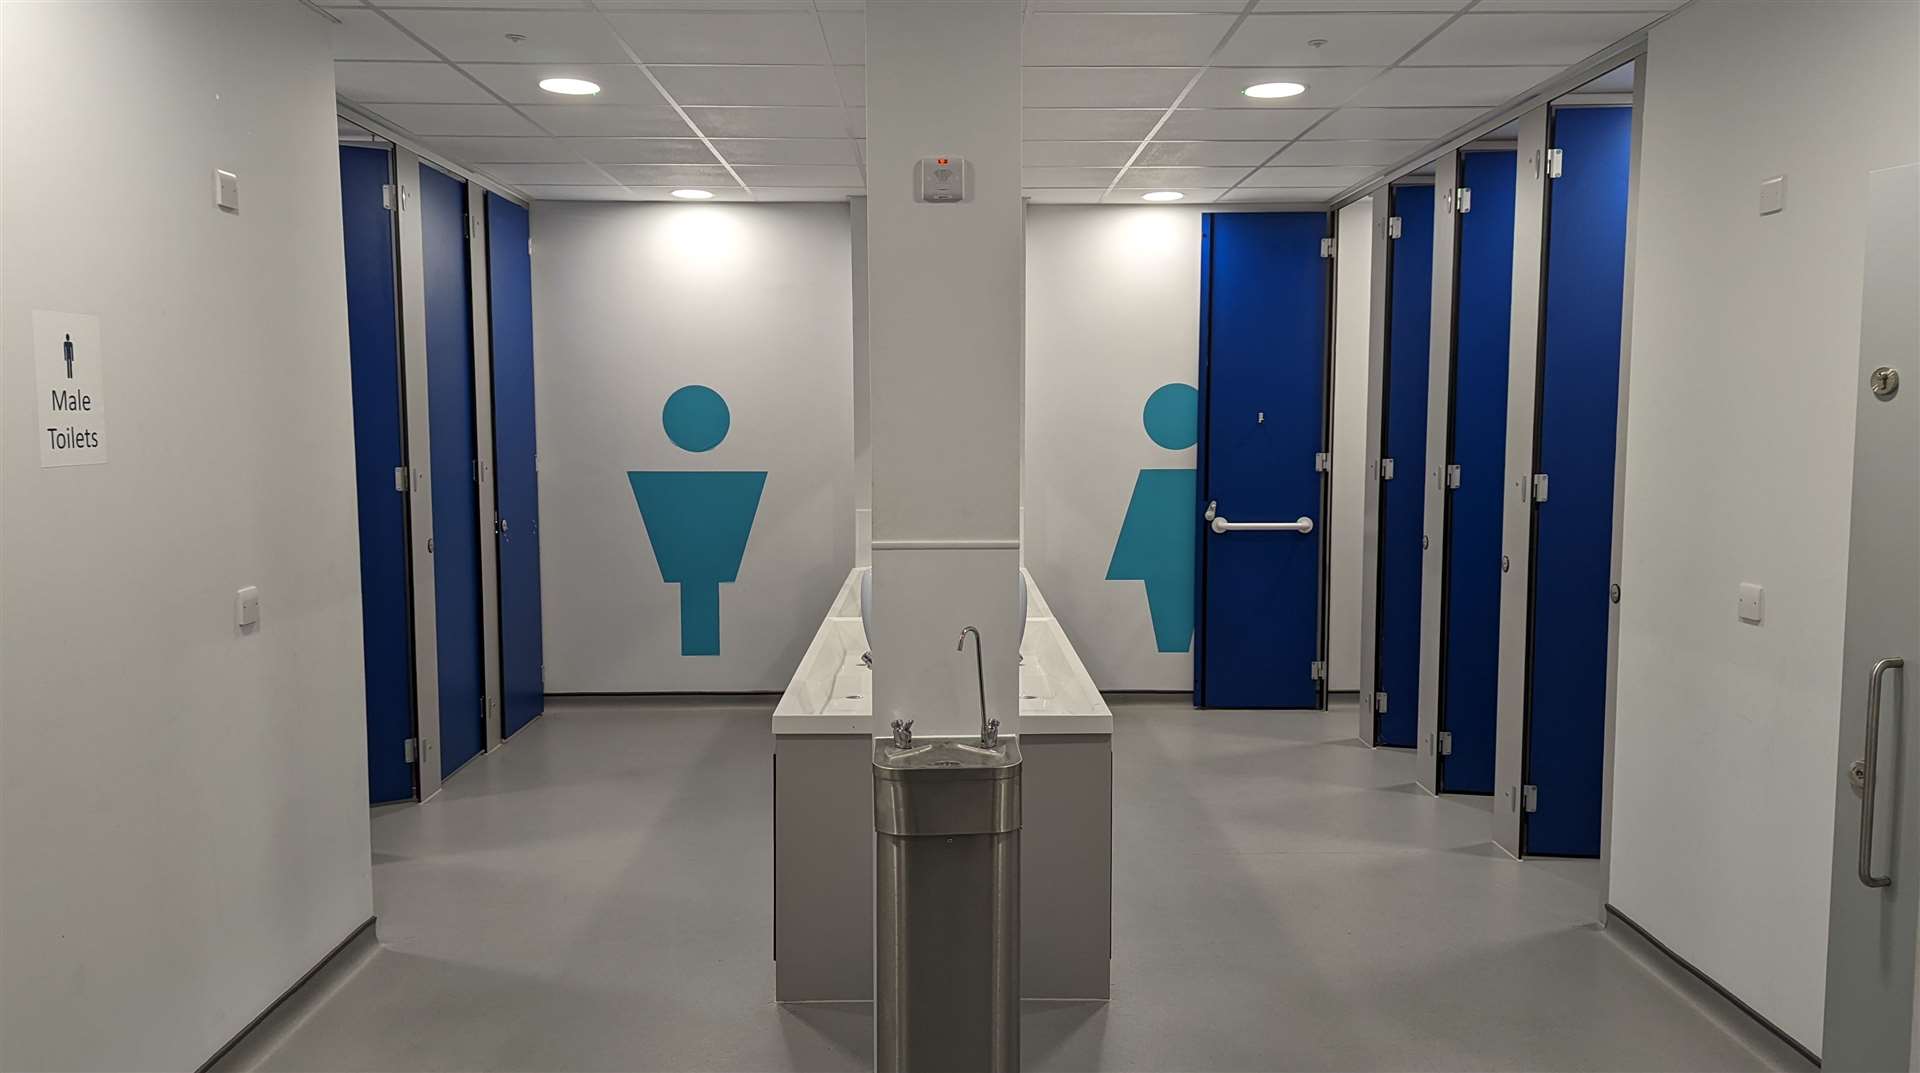 The school has toilets designed to be visible from the corridors